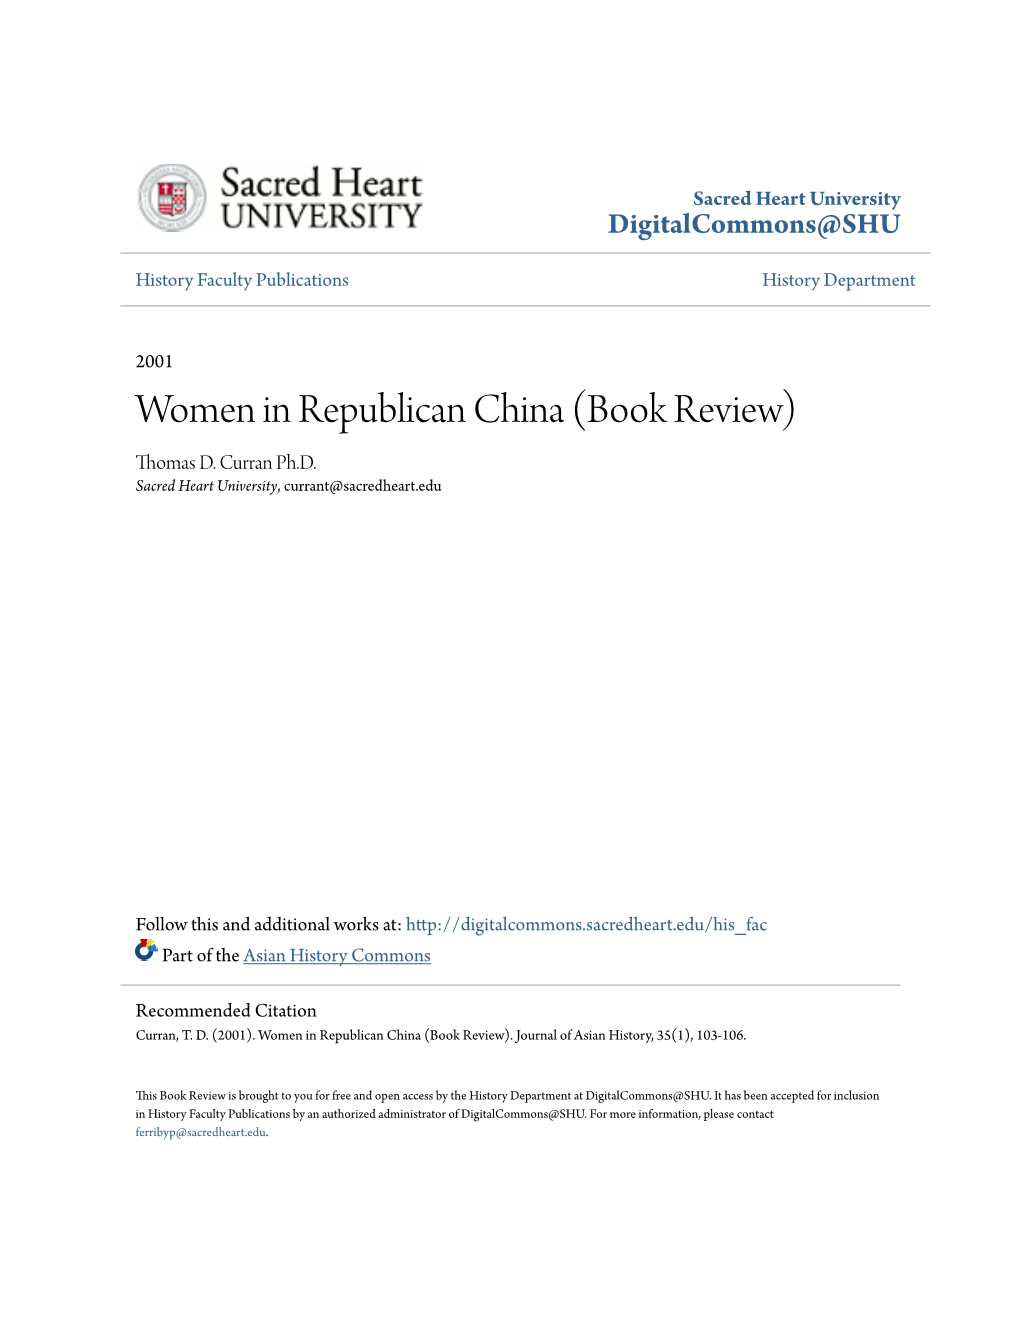 Women in Republican China (Book Review) Thomas D